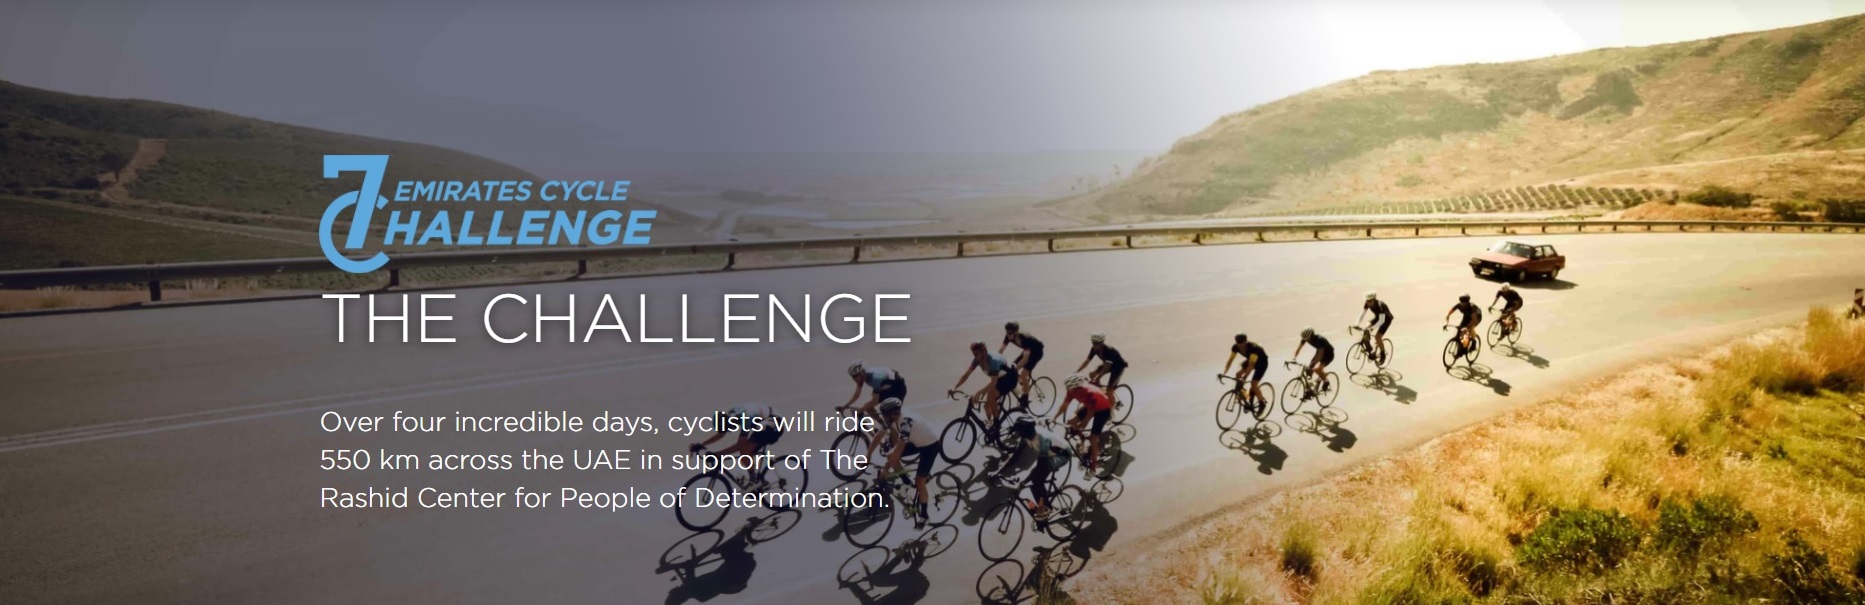 The First Group 7 Emirates Cycle Challenge